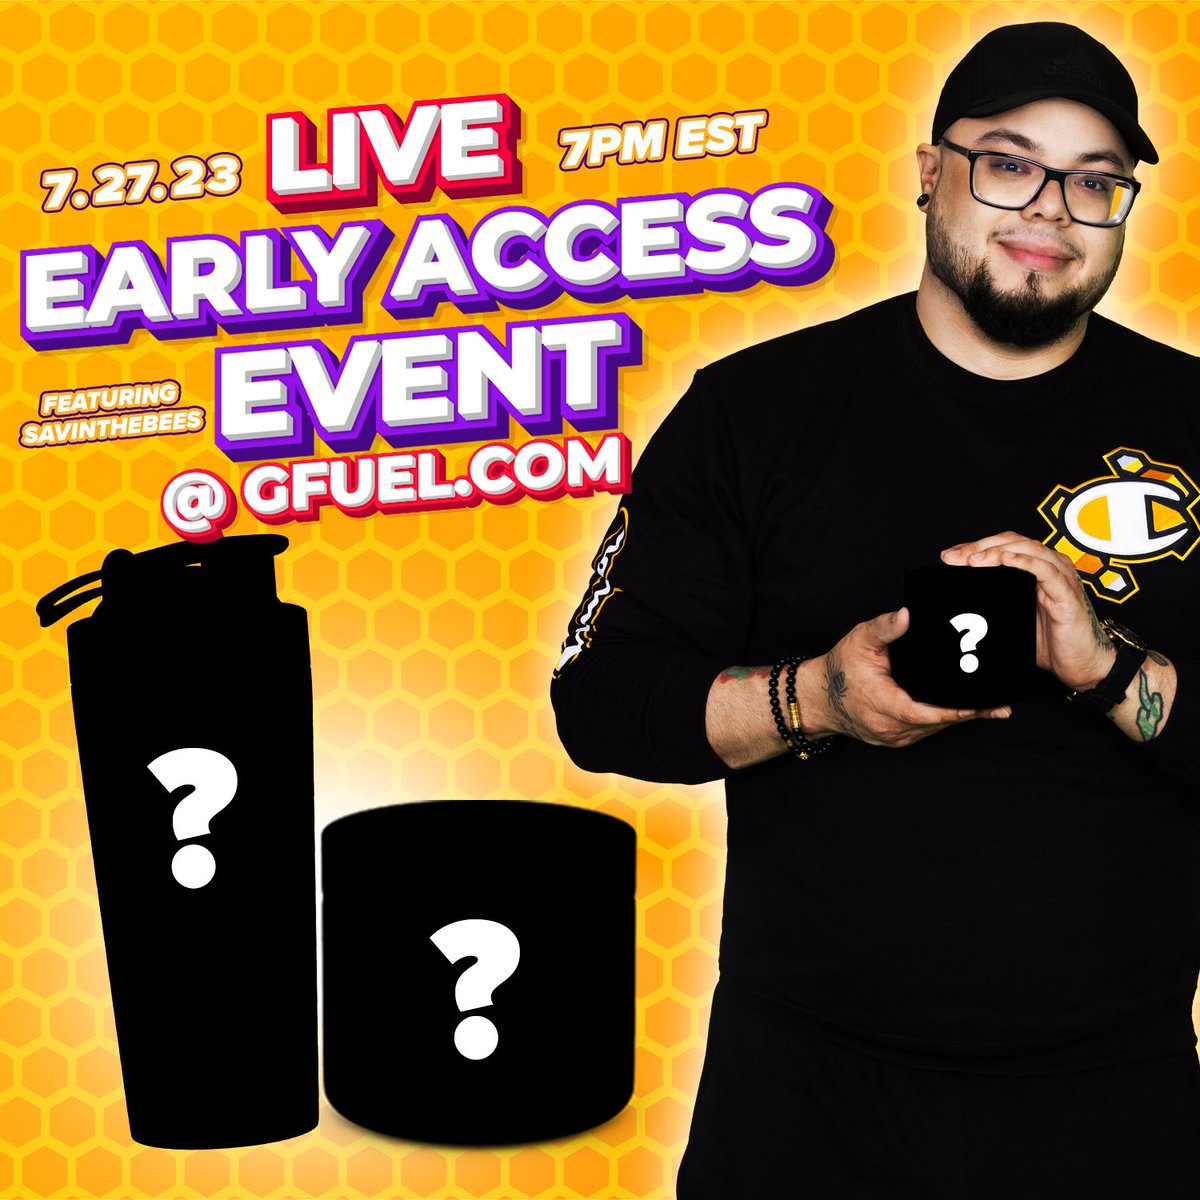 🐝 Mark your calendars & clear your schedules, people! We're comin' at ya HOT with a @SavinTheBees x #GFUEL EARLY ACCESS EVENT! #HIVESZN 🍯 

✍️ 𝗚𝗘𝗧 𝗡𝗢𝗧𝗜𝗙𝗜𝗘𝗗: GFUEL.ly/live
⏰ 𝗪𝗛𝗘𝗡: JULY 27TH! 7PM ET!
🖥️ 𝗪𝗛𝗘𝗥𝗘: GFUEL.com